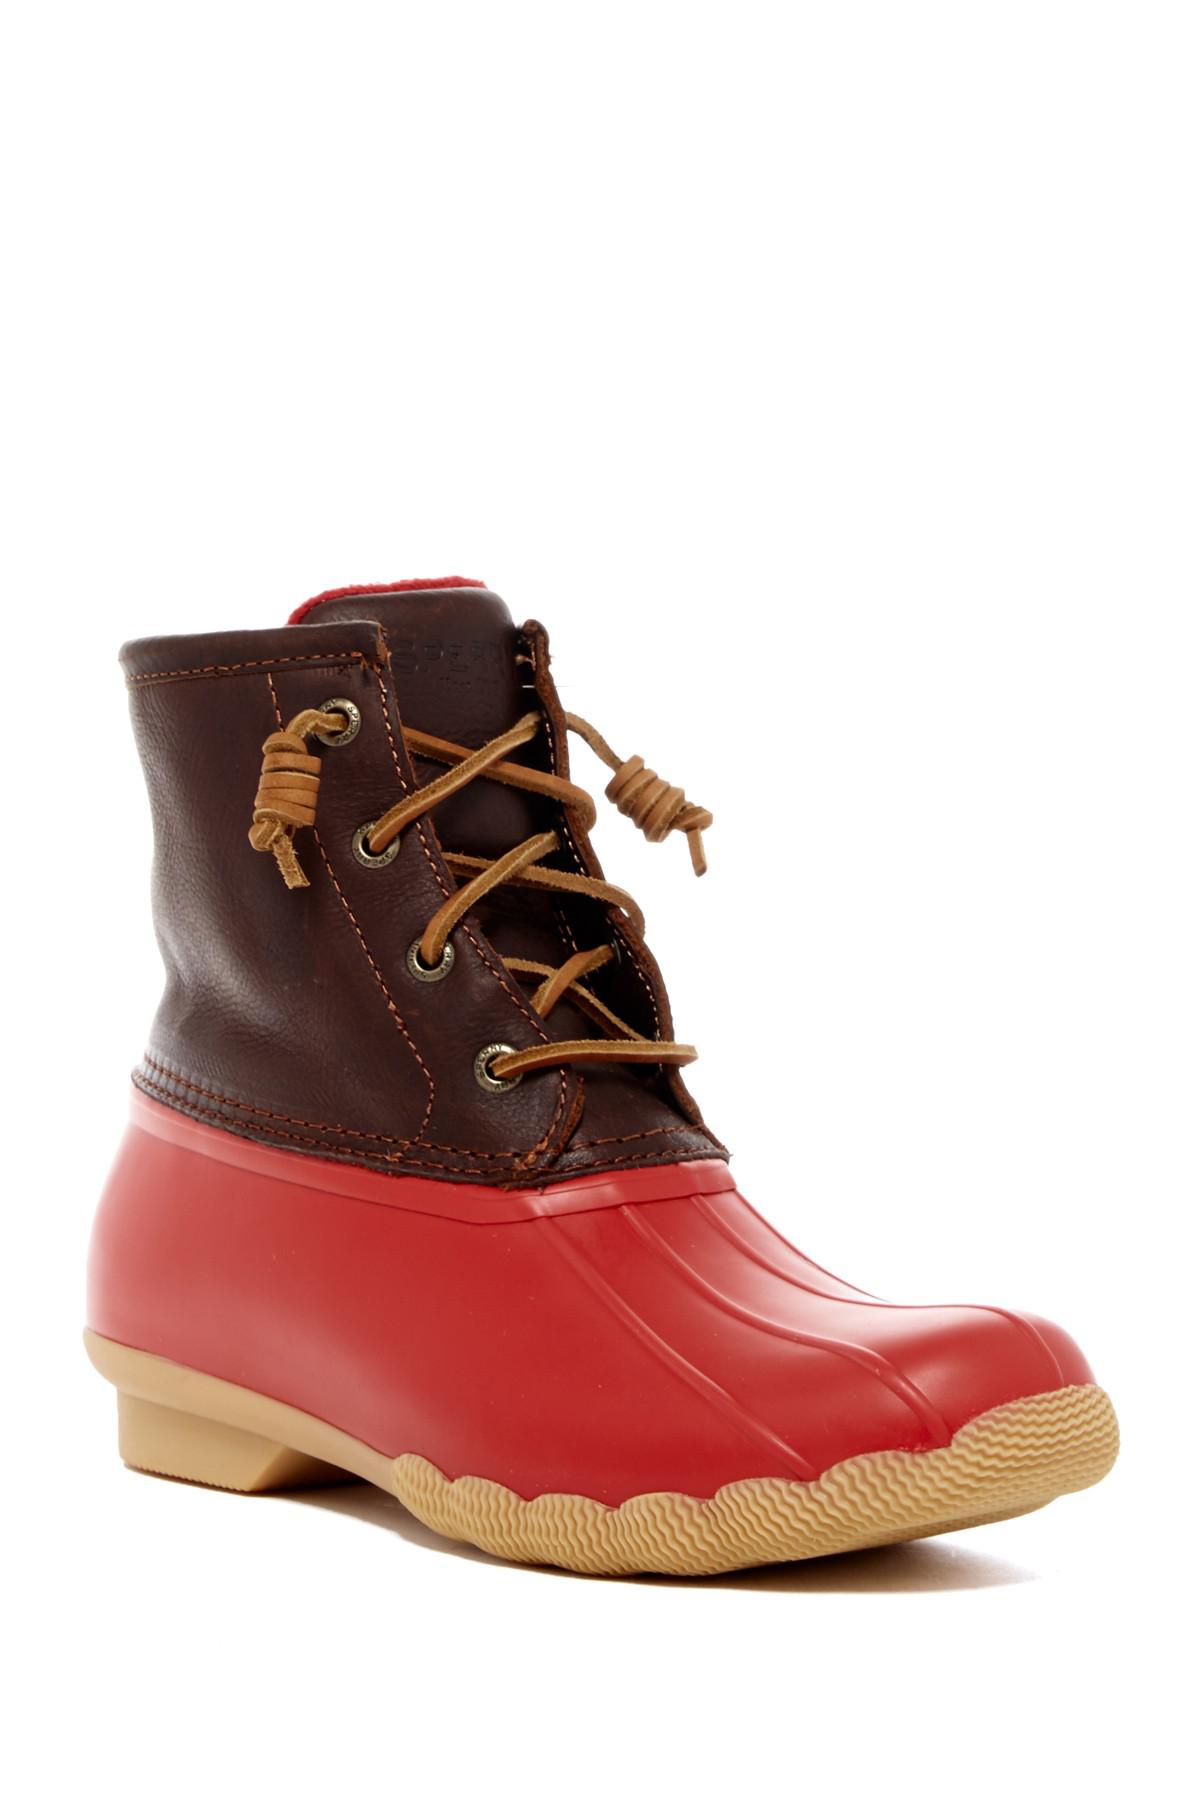 buy \u003e red duck boots sperry, Up to 66% OFF